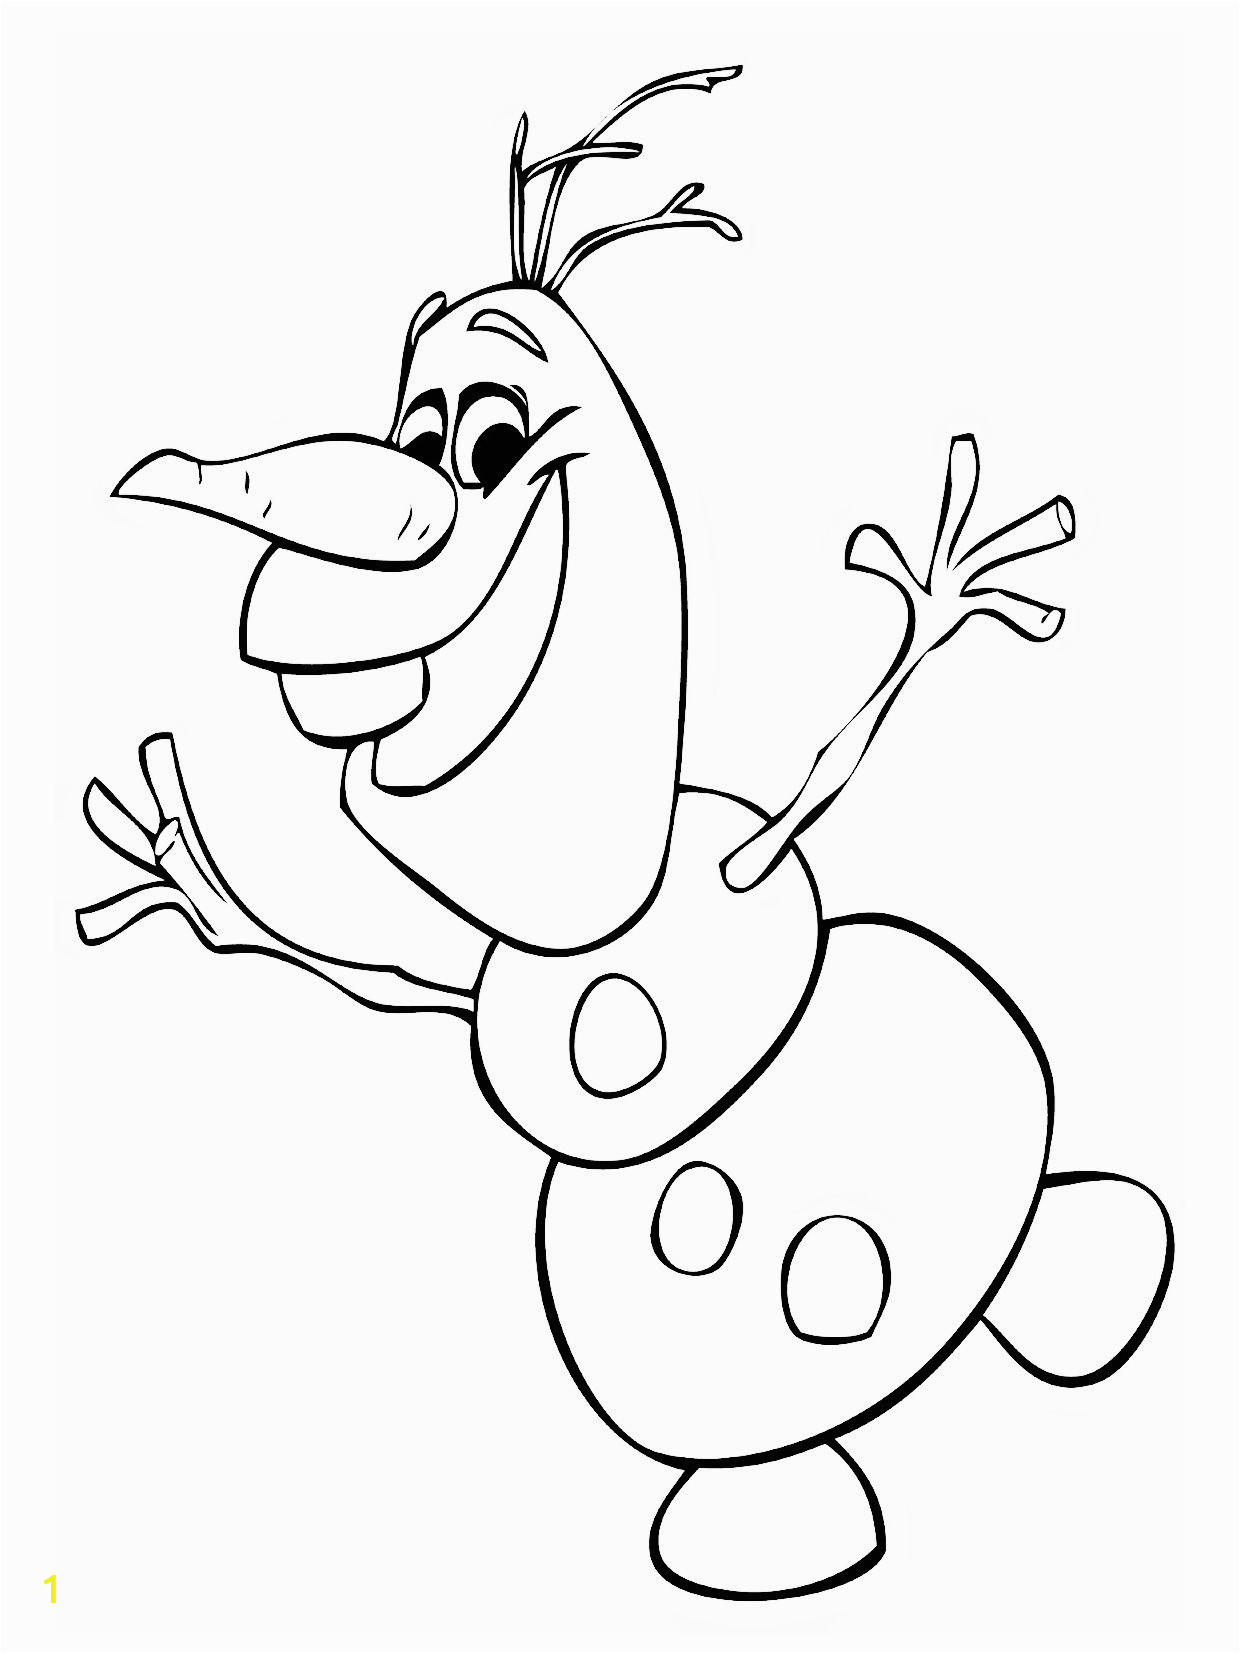 olaf frozen coloring page best of images pin od pouac2bevateac2bea radka hagarova na nastenke ac2bdadove kraac2beovstvo of olaf frozen coloring page